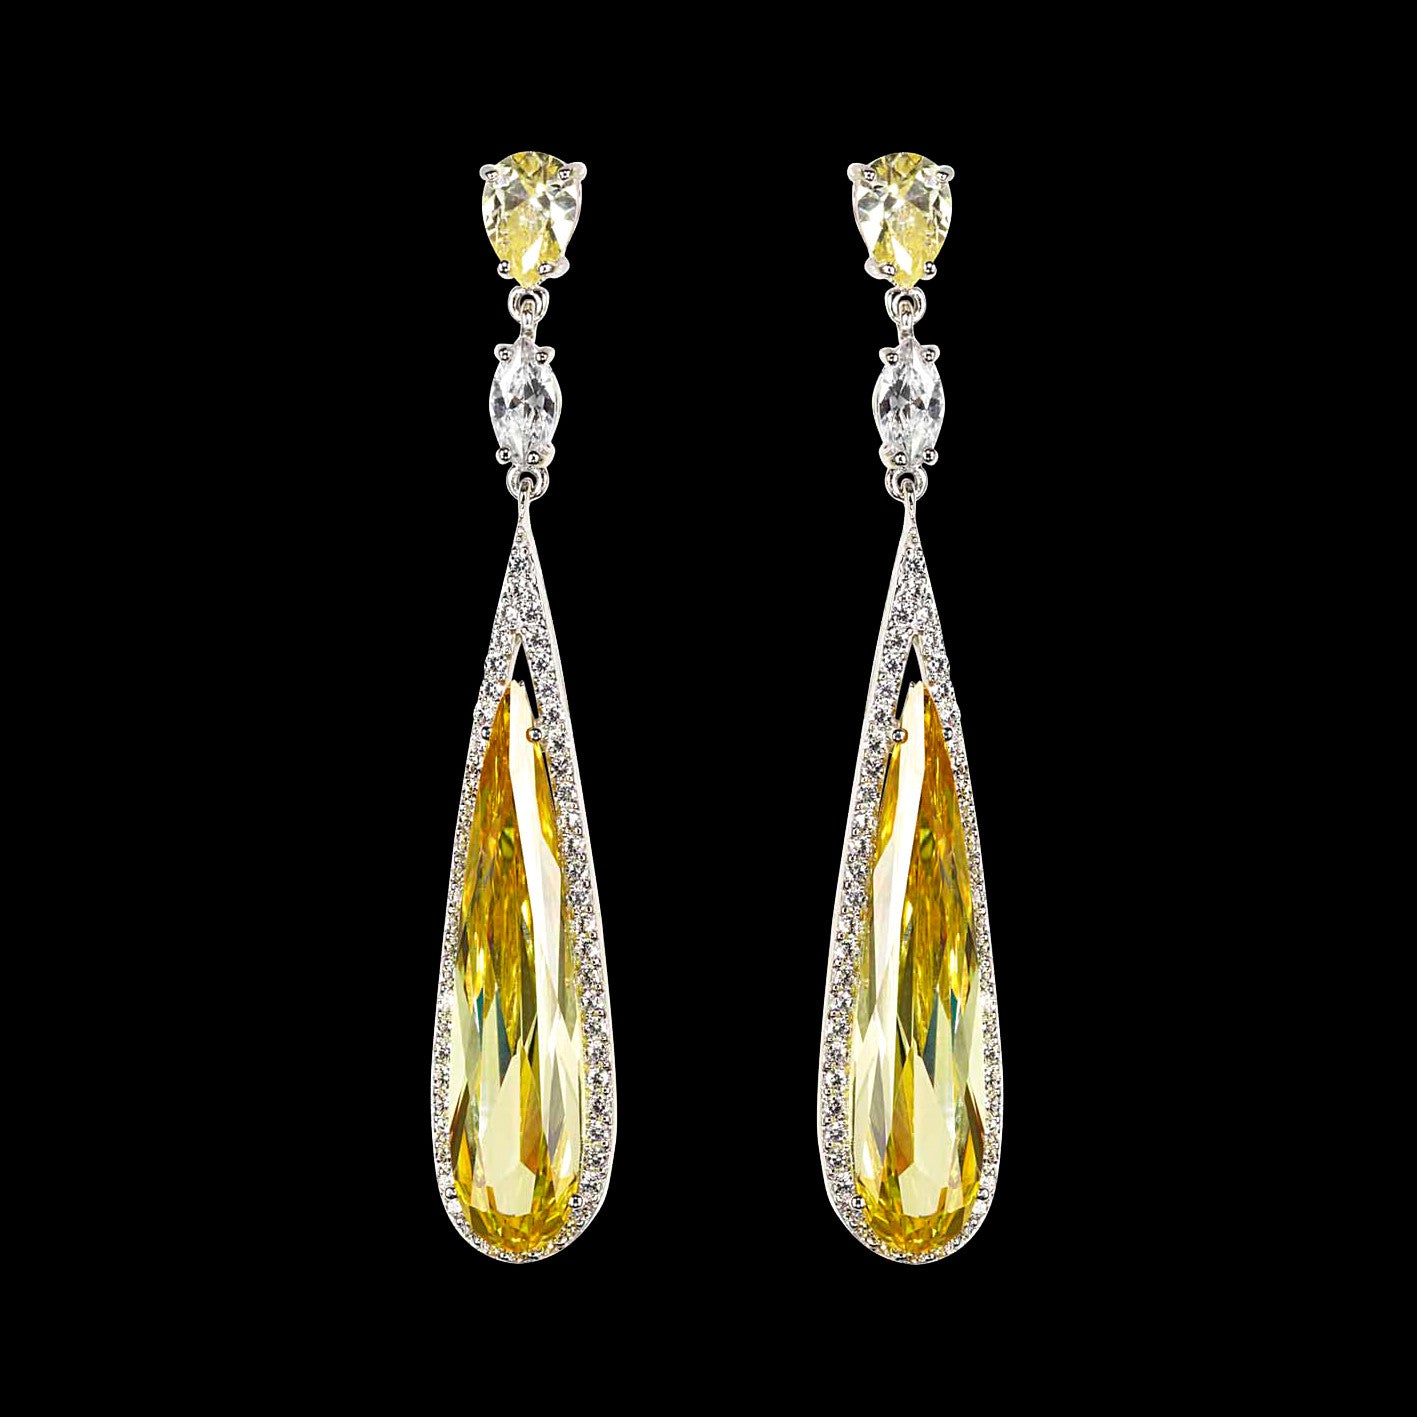 Shard Citrine Earrings, Earring, Anabela Chan Joaillerie - Fine jewelry with laboratory grown and created gemstones hand-crafted in the United Kingdom. Anabela Chan Joaillerie is the first fine jewellery brand in the world to champion laboratory-grown and created gemstones with high jewellery design, artisanal craftsmanship and a focus on ethical and sustainable innovations.